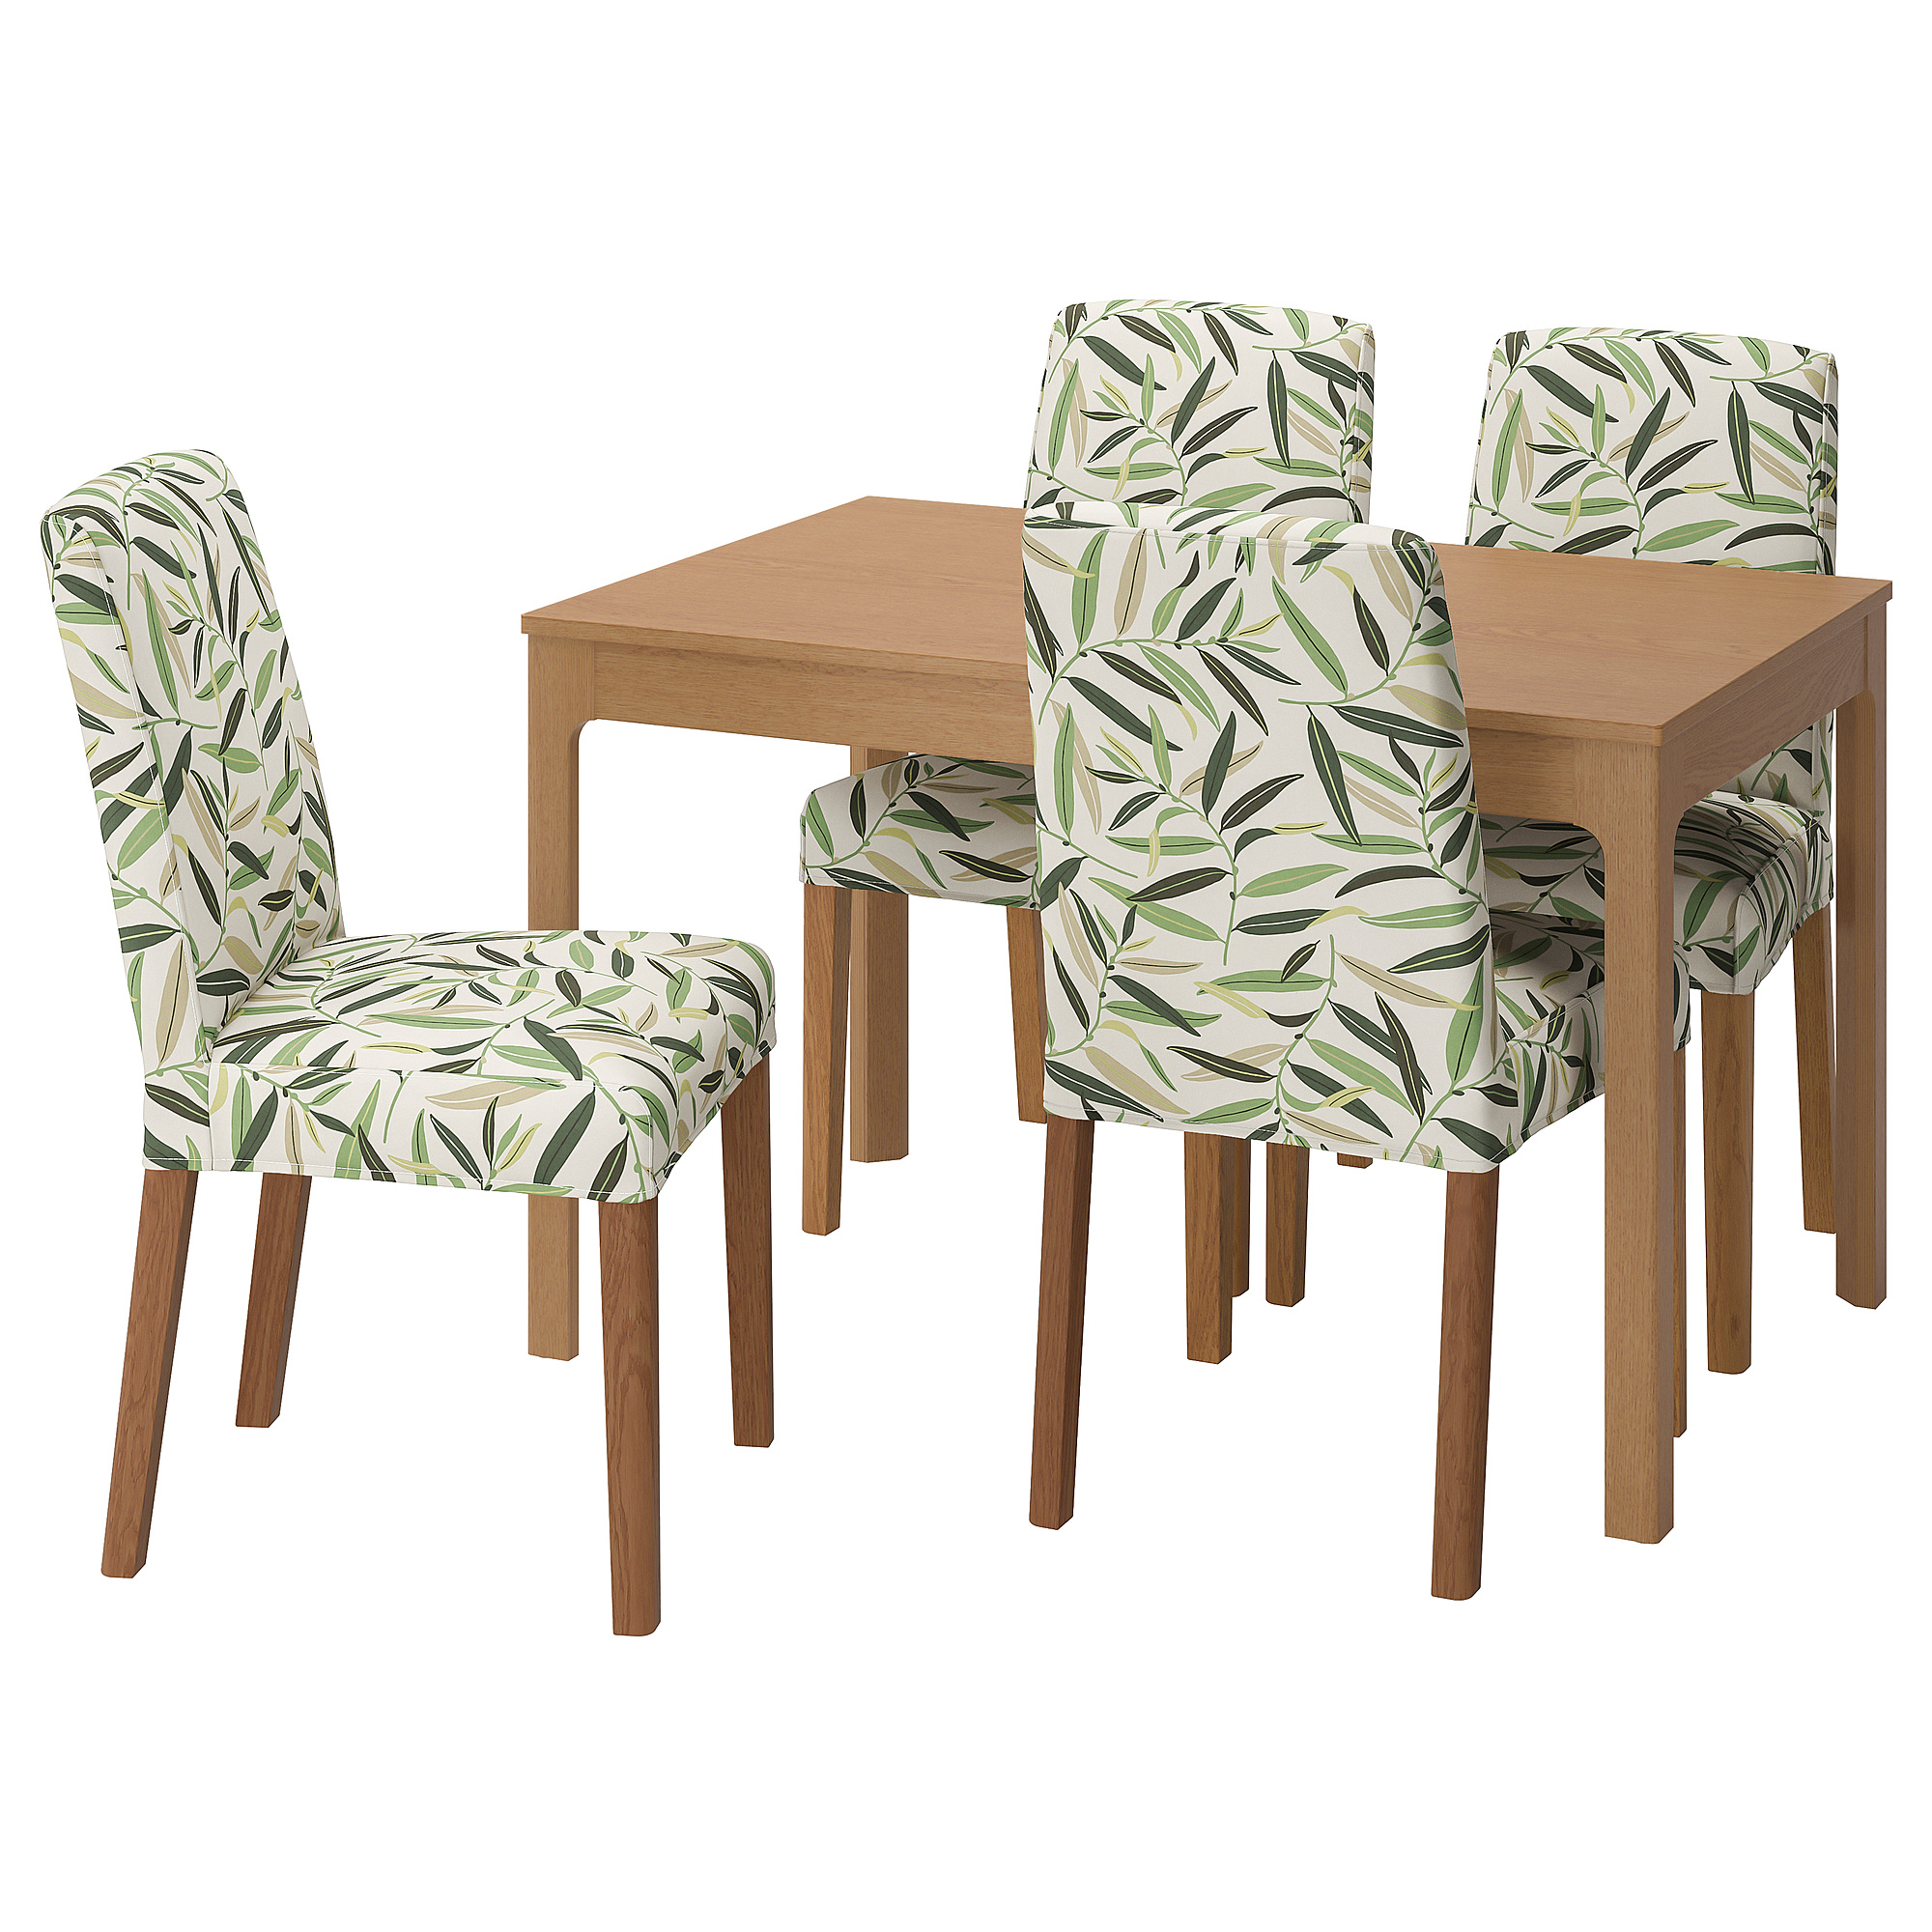 EKEDALEN/BERGMUND table and 4 chairs